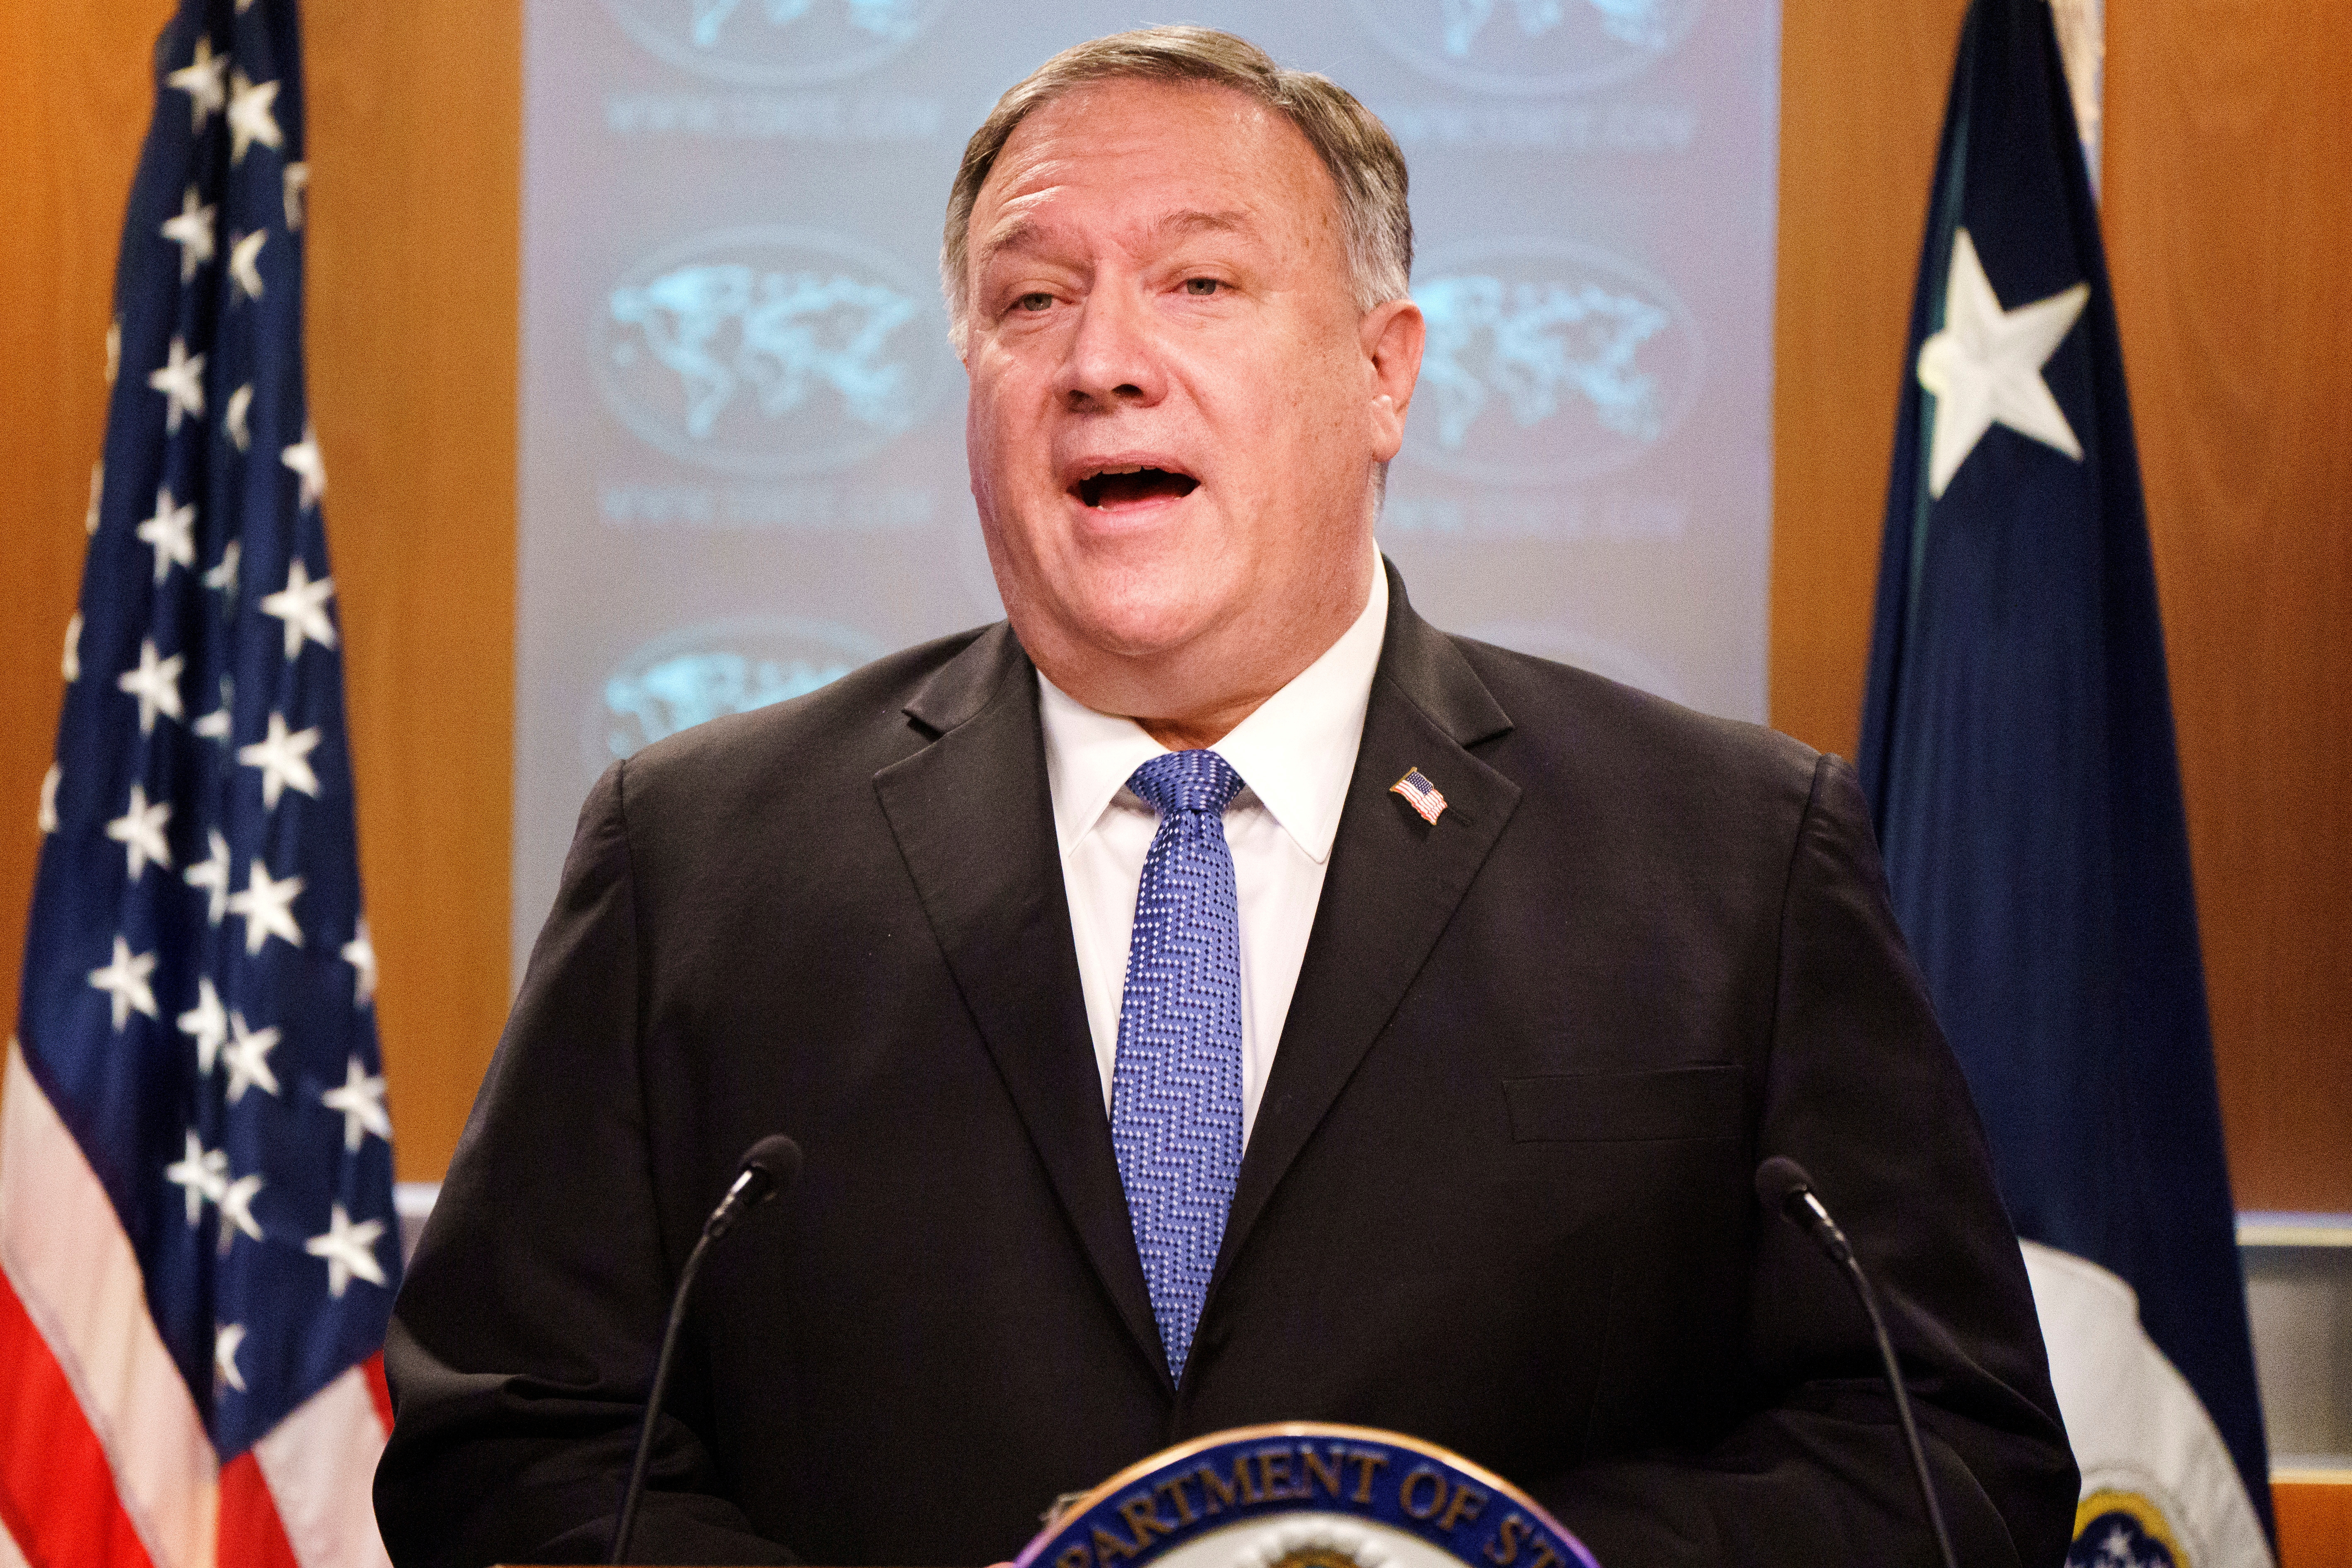 U.S. Secretary of State Mike Pompeo speaks during a briefing to the media at the State Department in Washington, U.S., November 10, 2020. Jacquelyn Martin/Pool via REUTERS